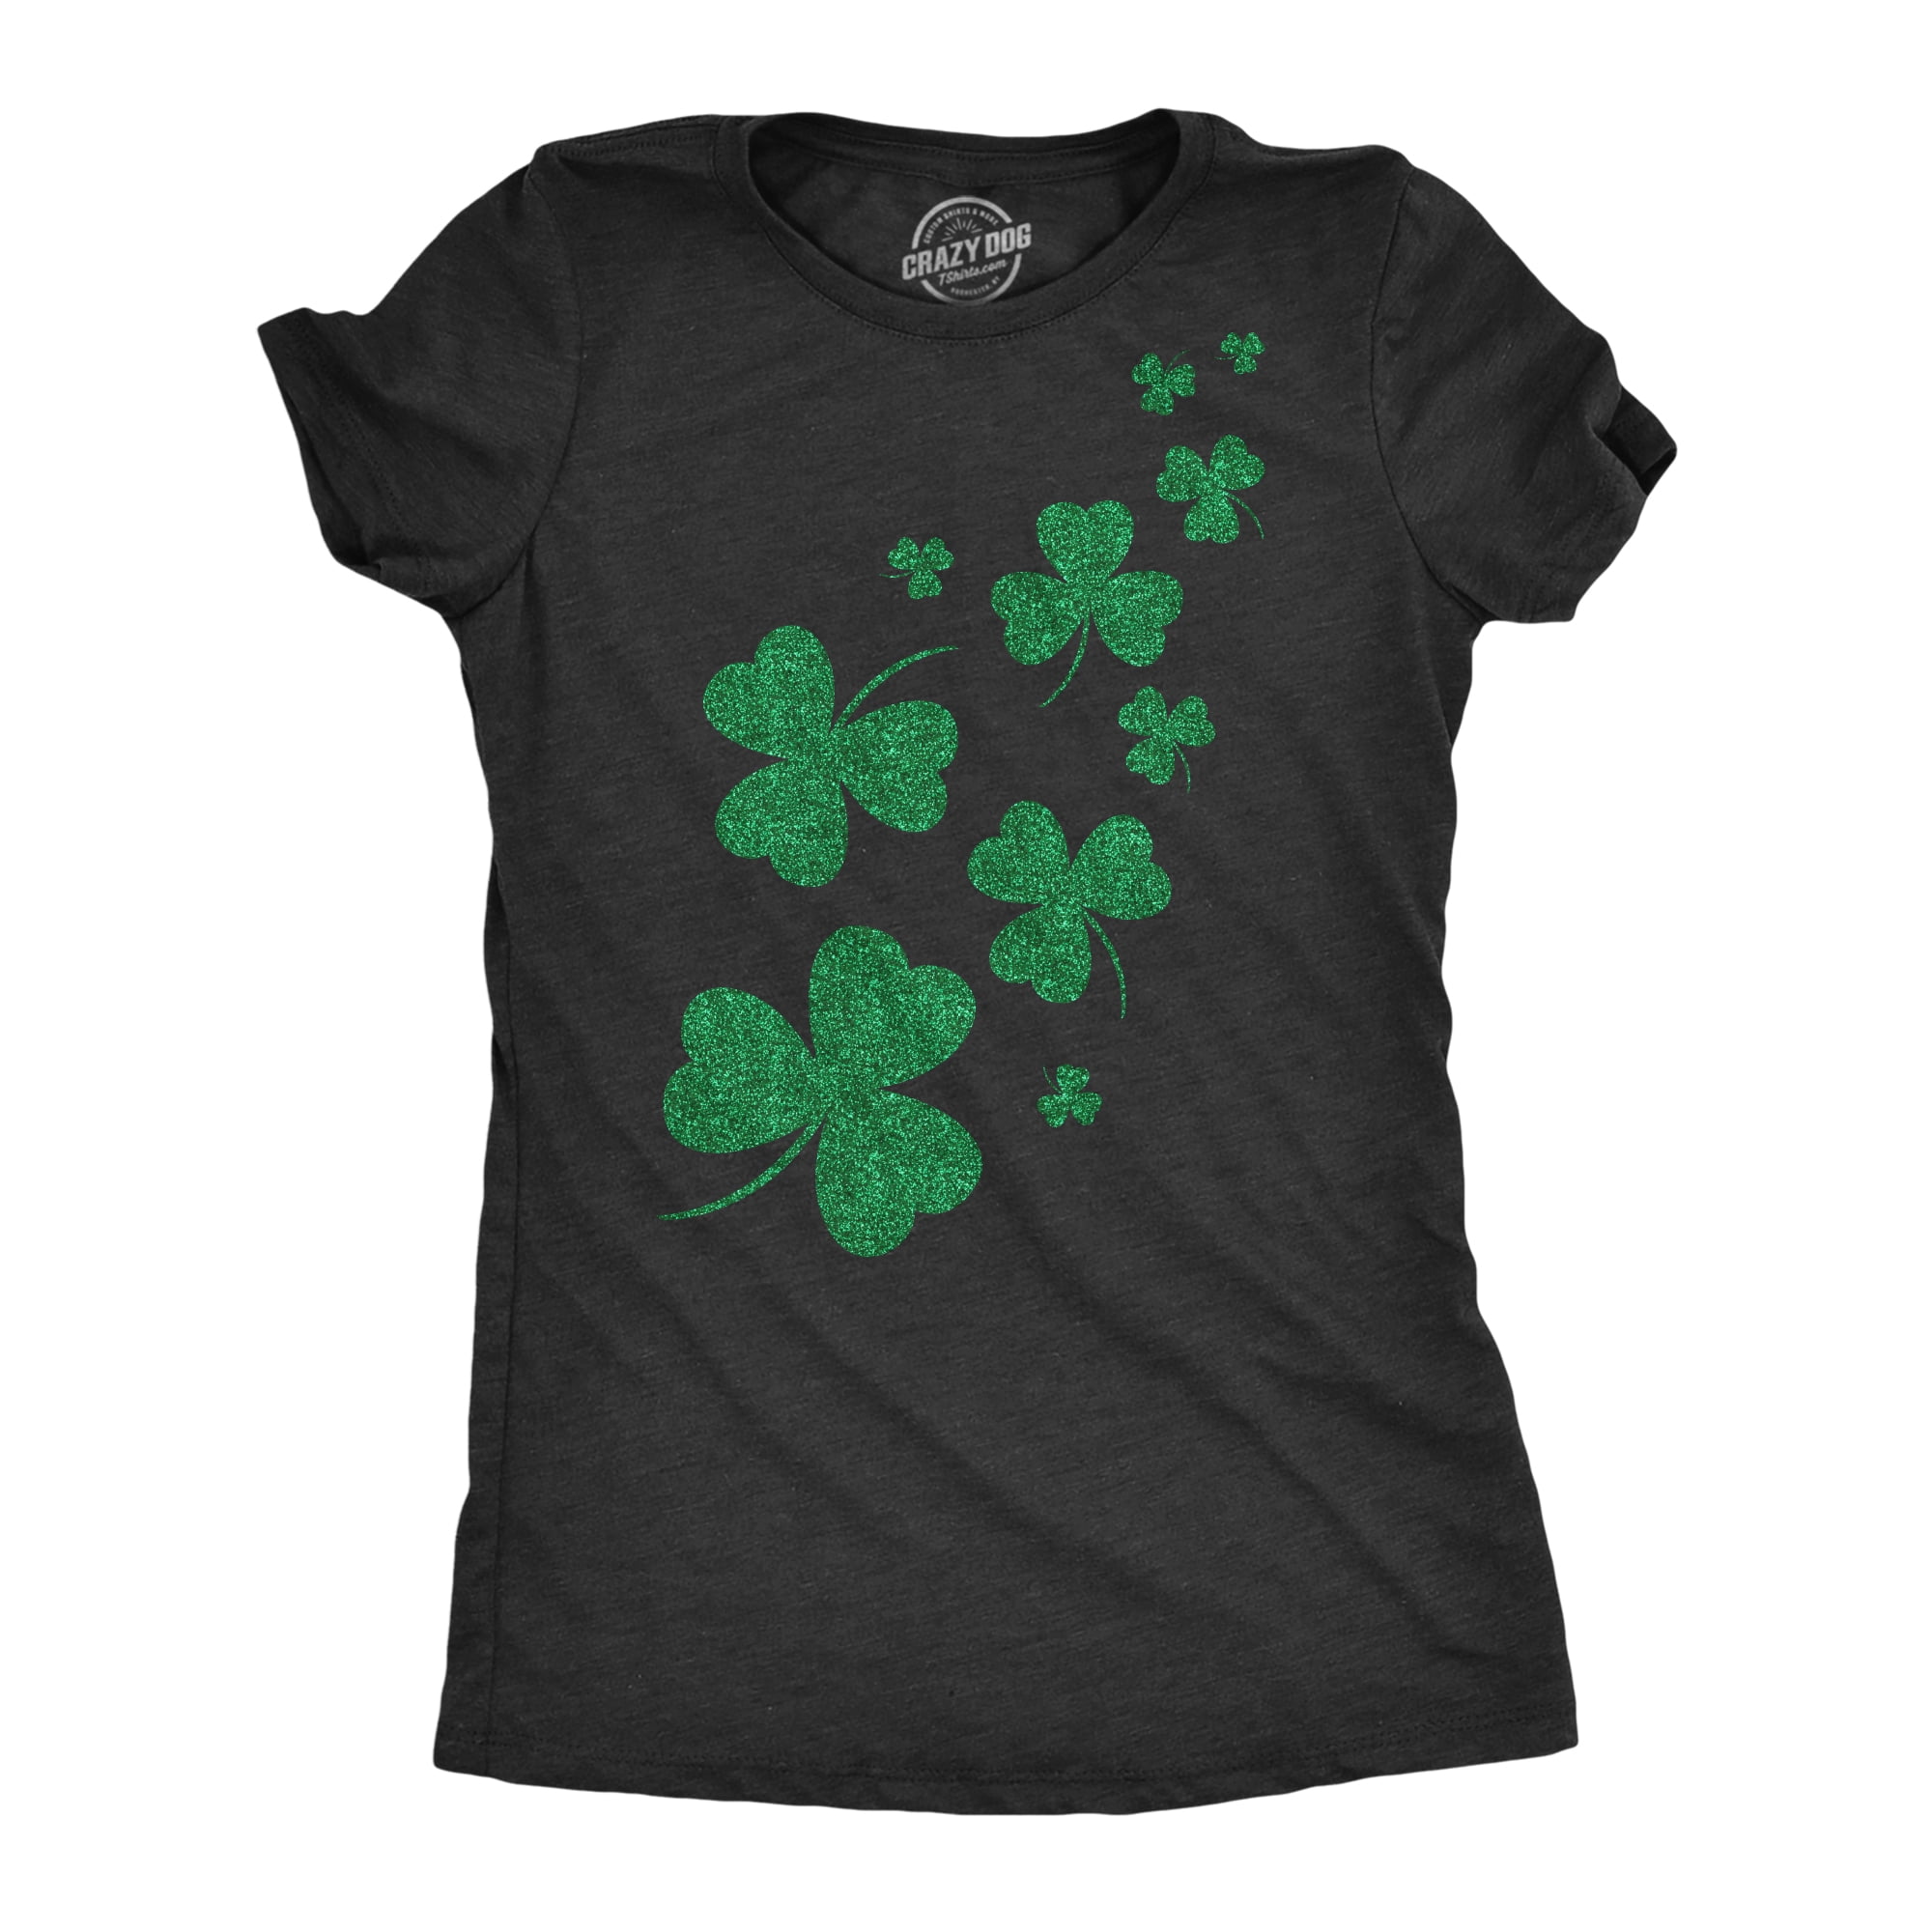 Paddy's Day Shirt Patrick's Day Gift Womens St Patrick Day Shirt Heart Shamrock Sweatshirt St Patrick's Day Hoodie Clover Shirt,St St